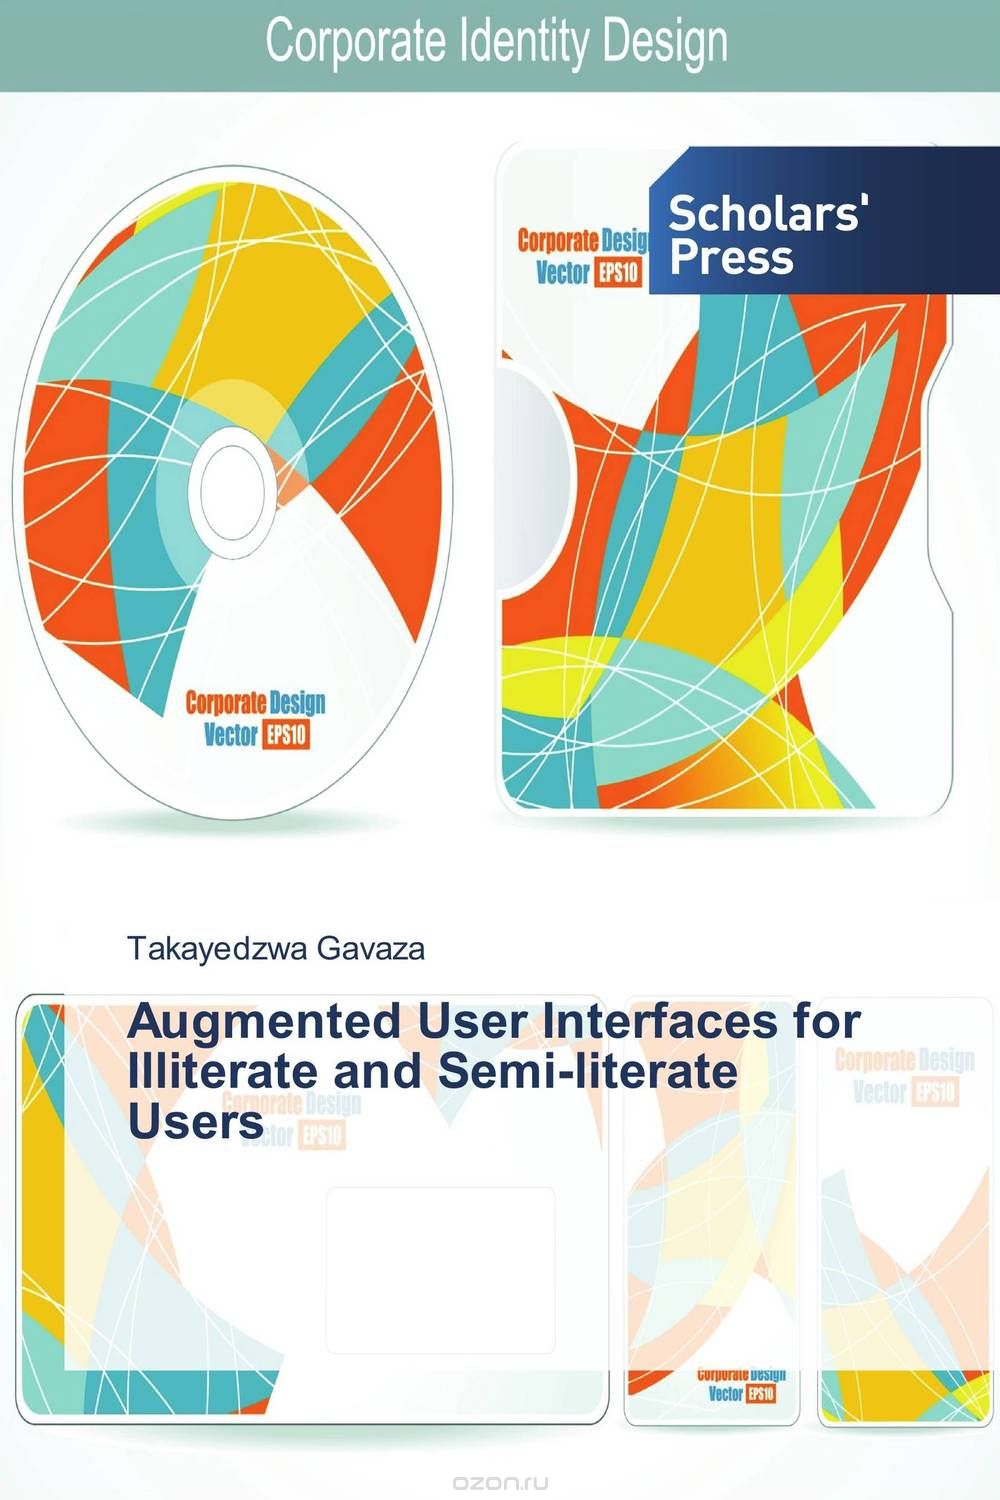 Augmented User Interfaces for Illiterate and Semi-literate Users